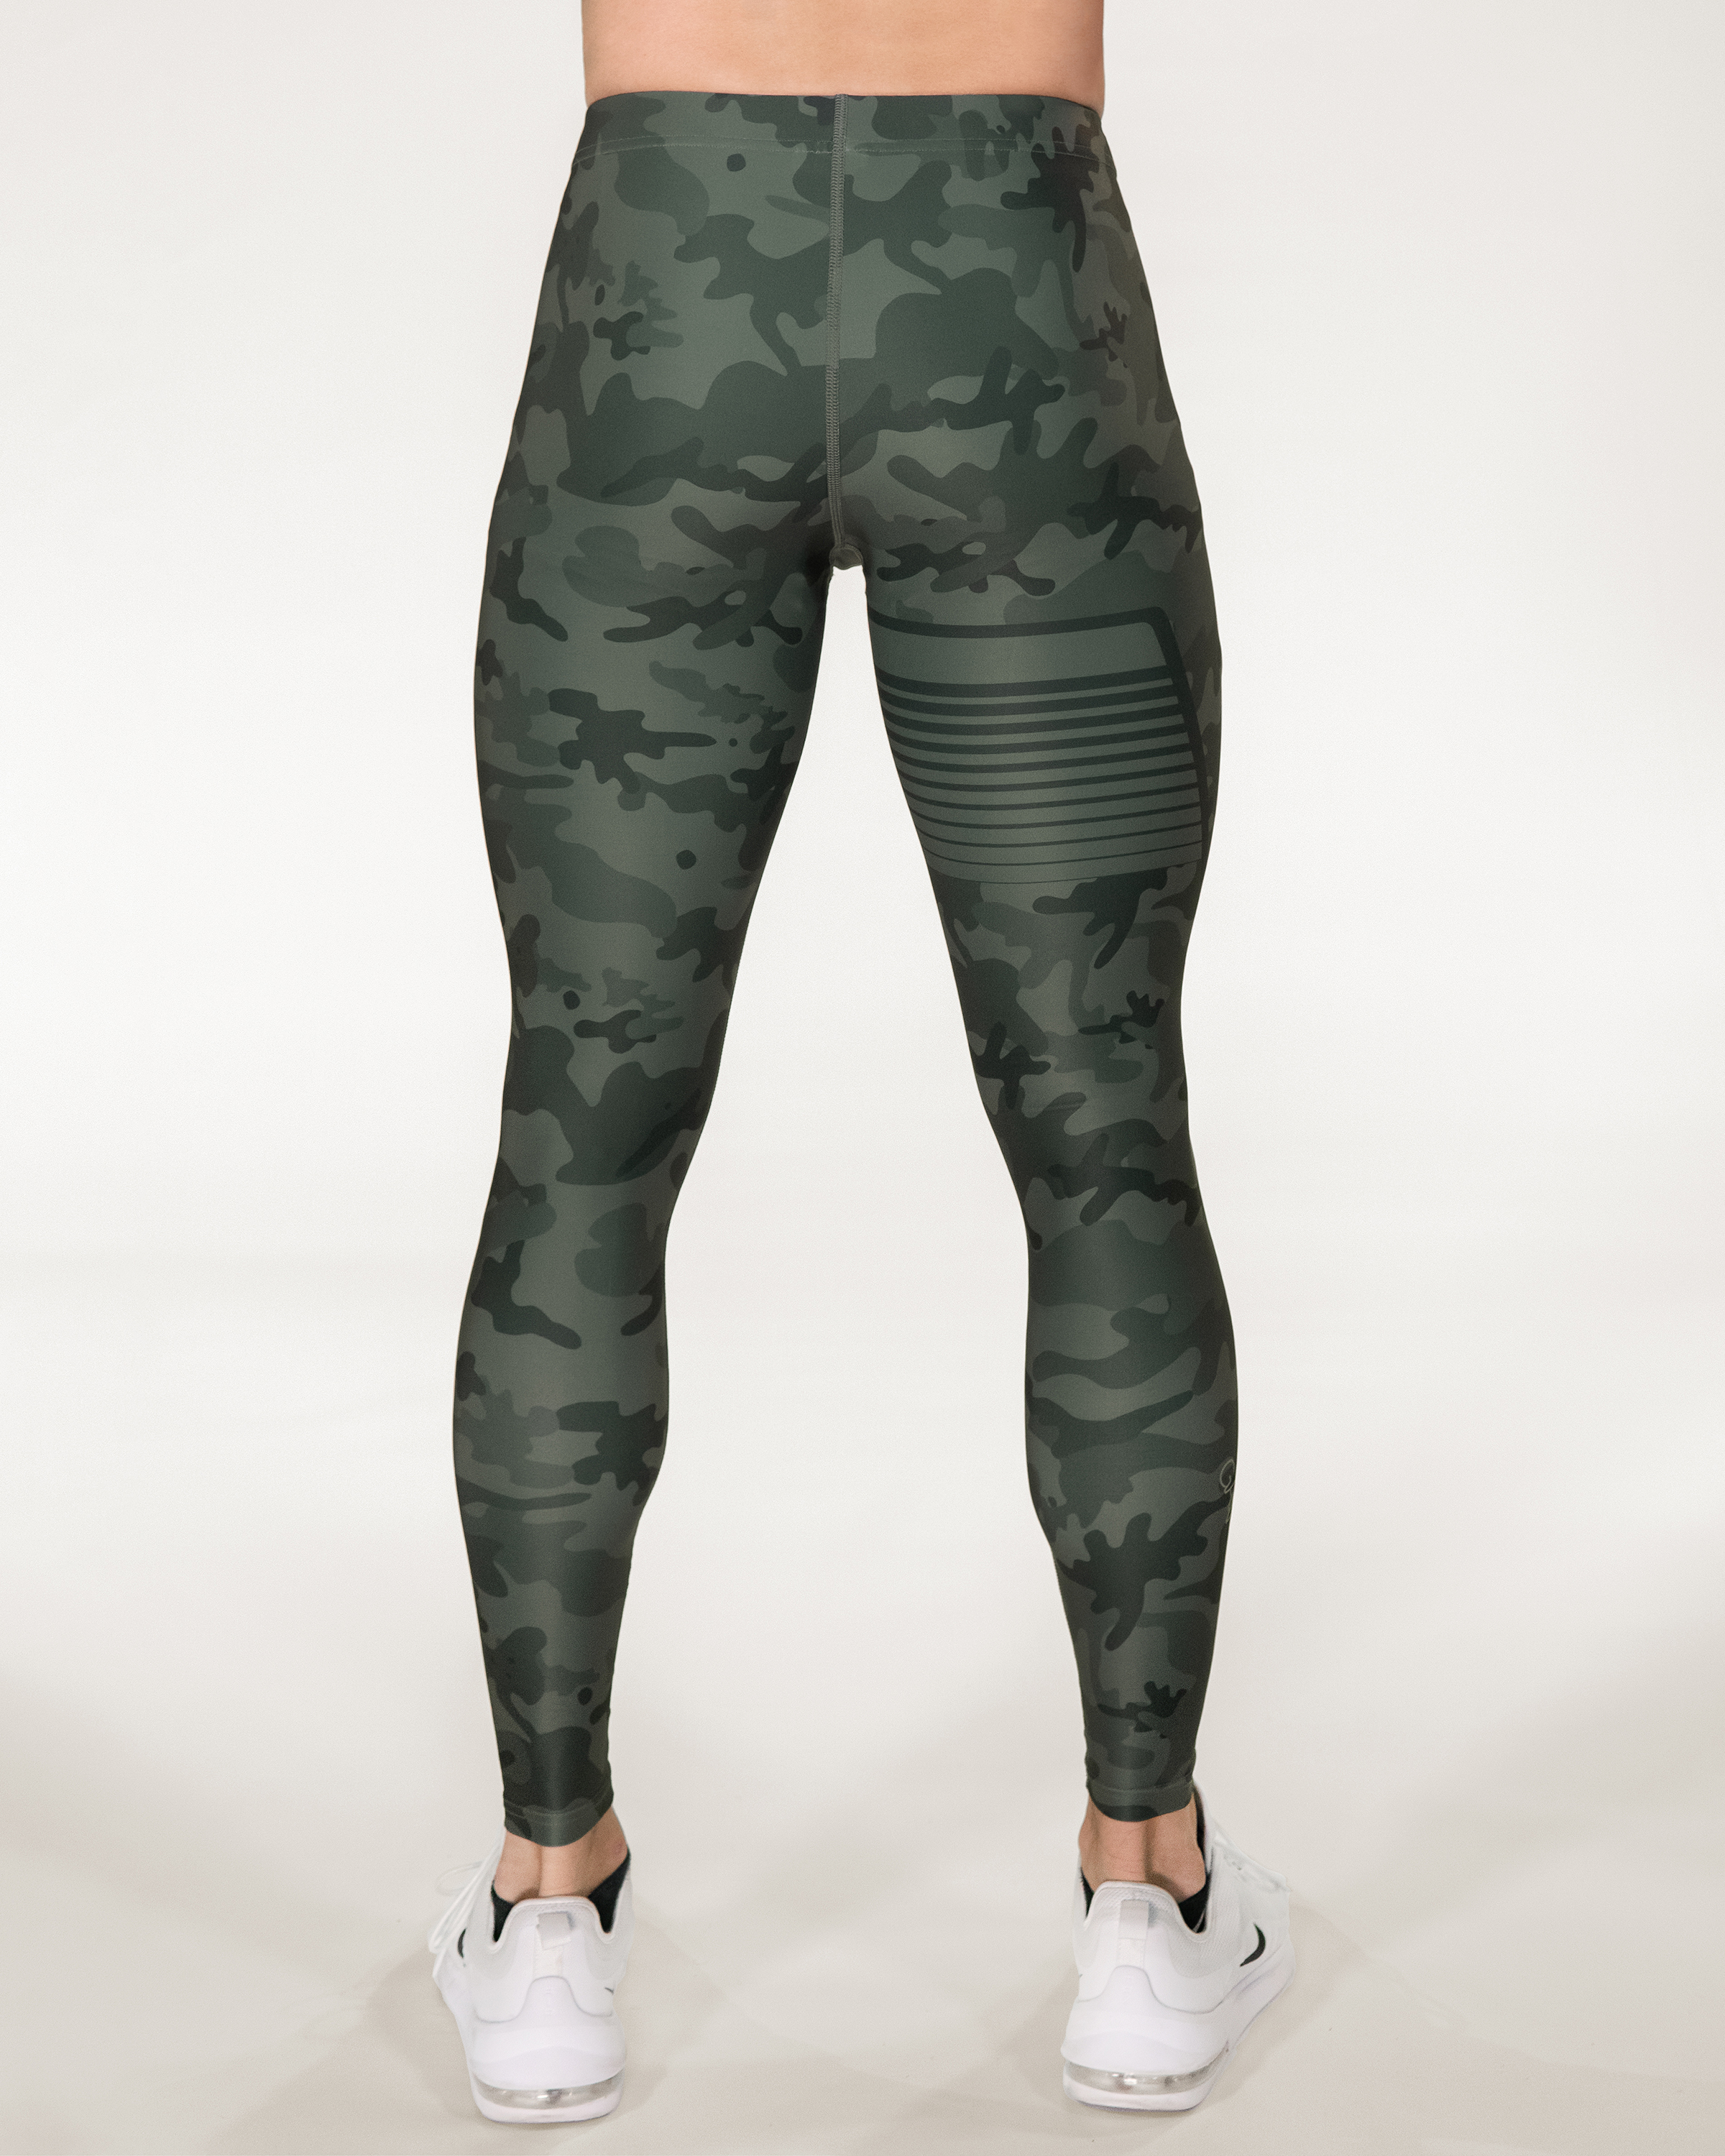 GAVELO Sniper Camo Green Compression Pants - Gavelo Official Store